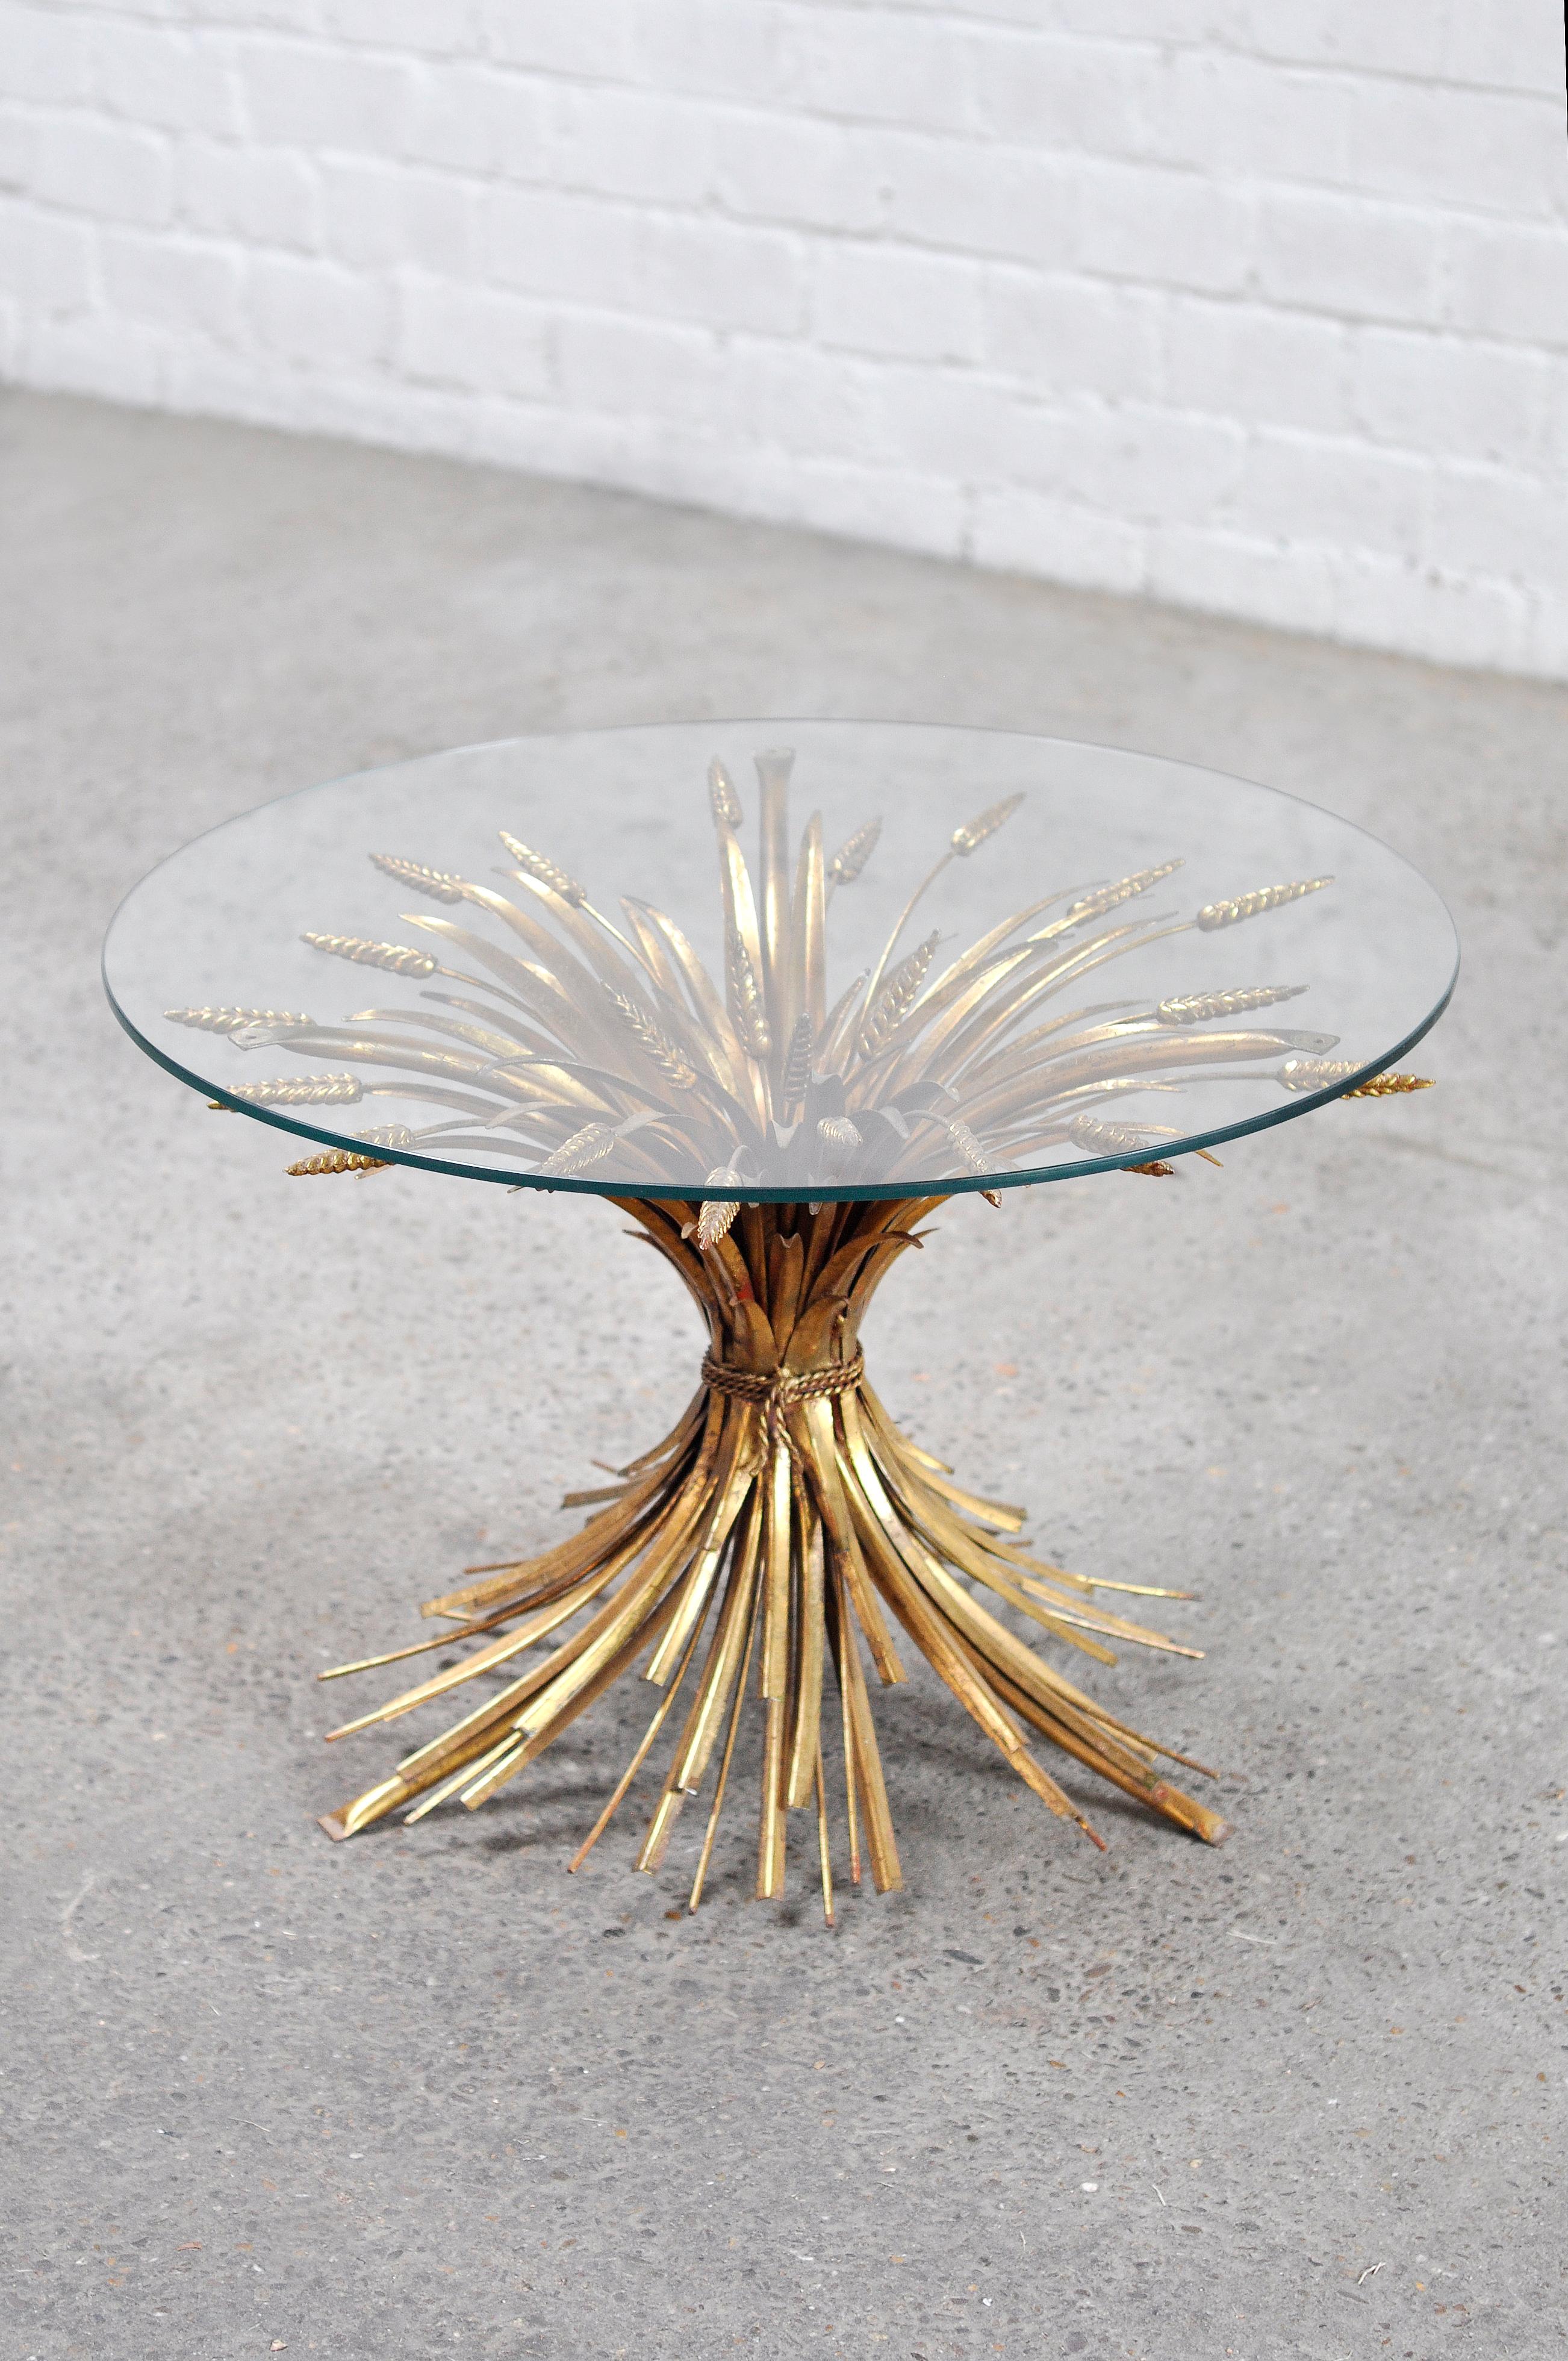 Gilt sheaf of wheat side table in the style of Coco Chanel, 1960's. Features a stunning patinated gold metal frame, in the shape of a sheaf of wheat. This design became famous when both Coco Chanel and Yves Saint Laurent utilized them in their own